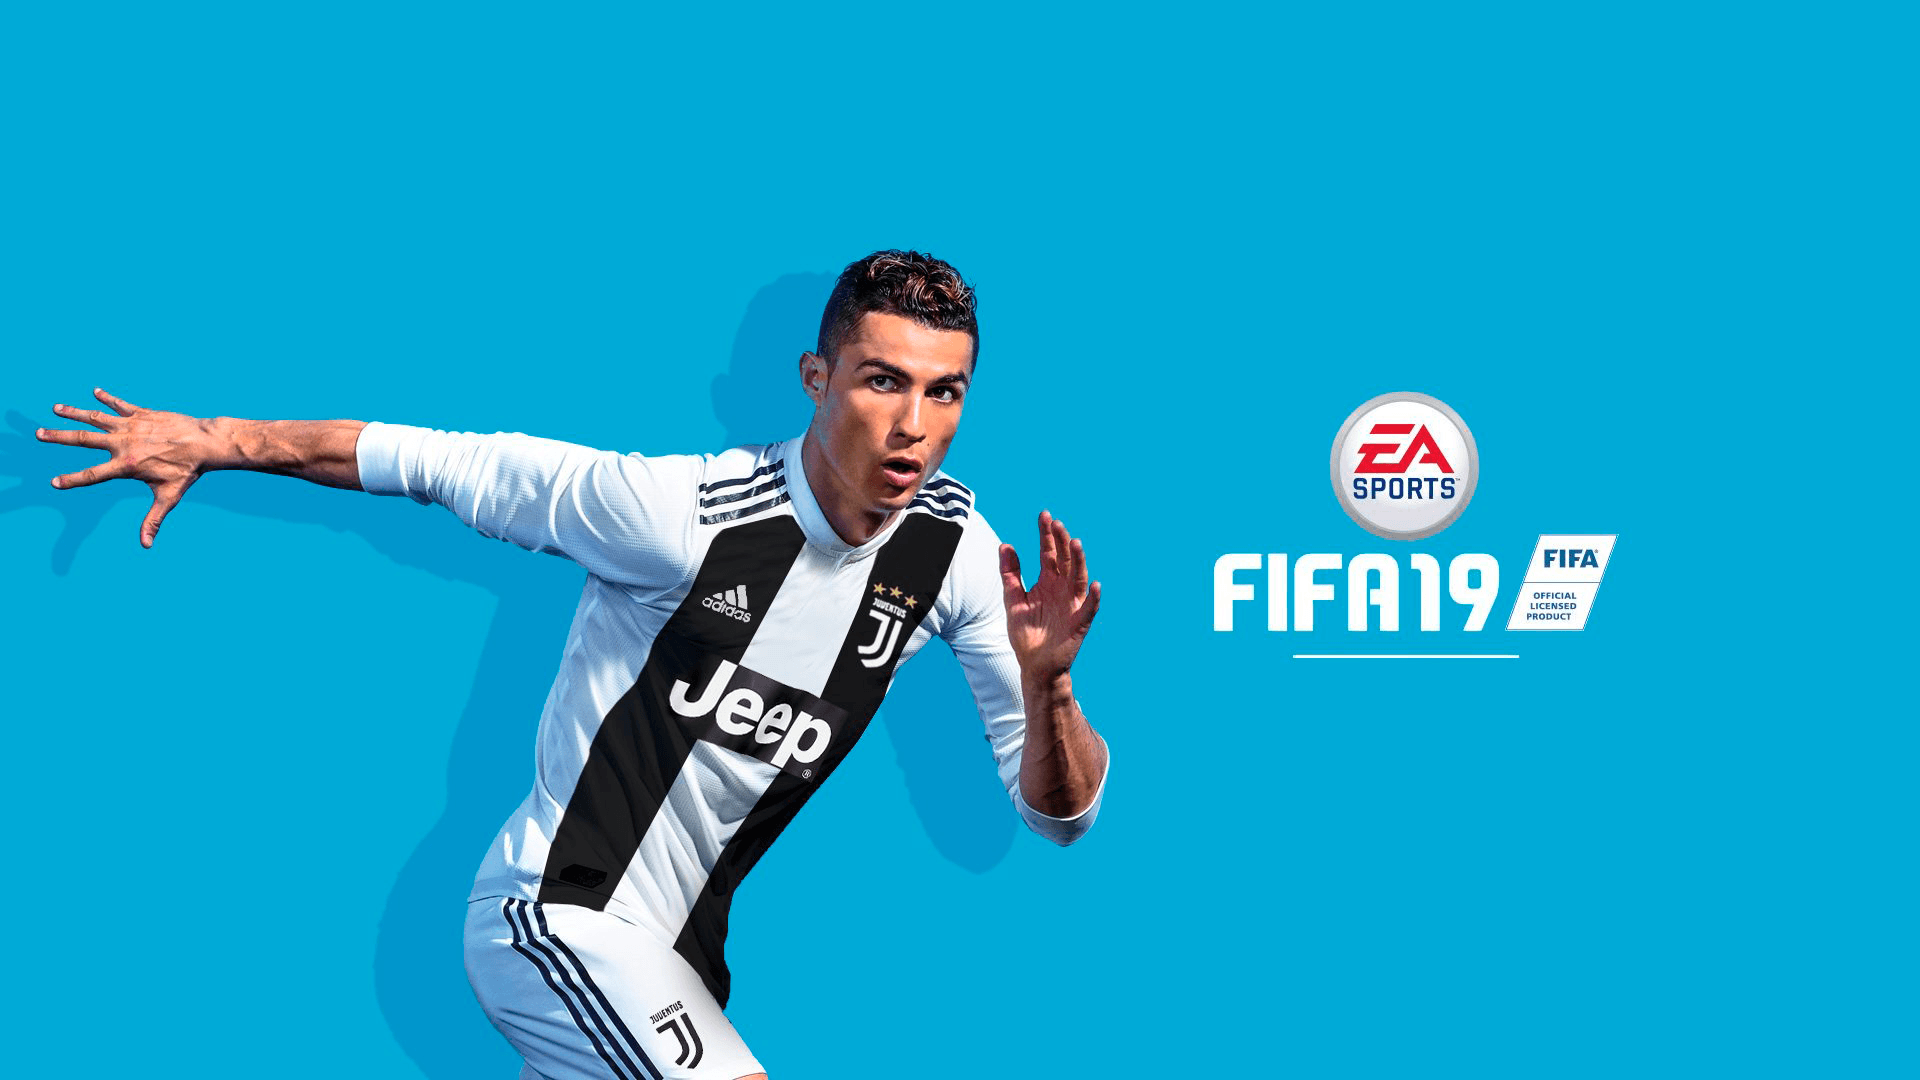 FIFA 19: New scenarios after the passage of CR7 to Juventus